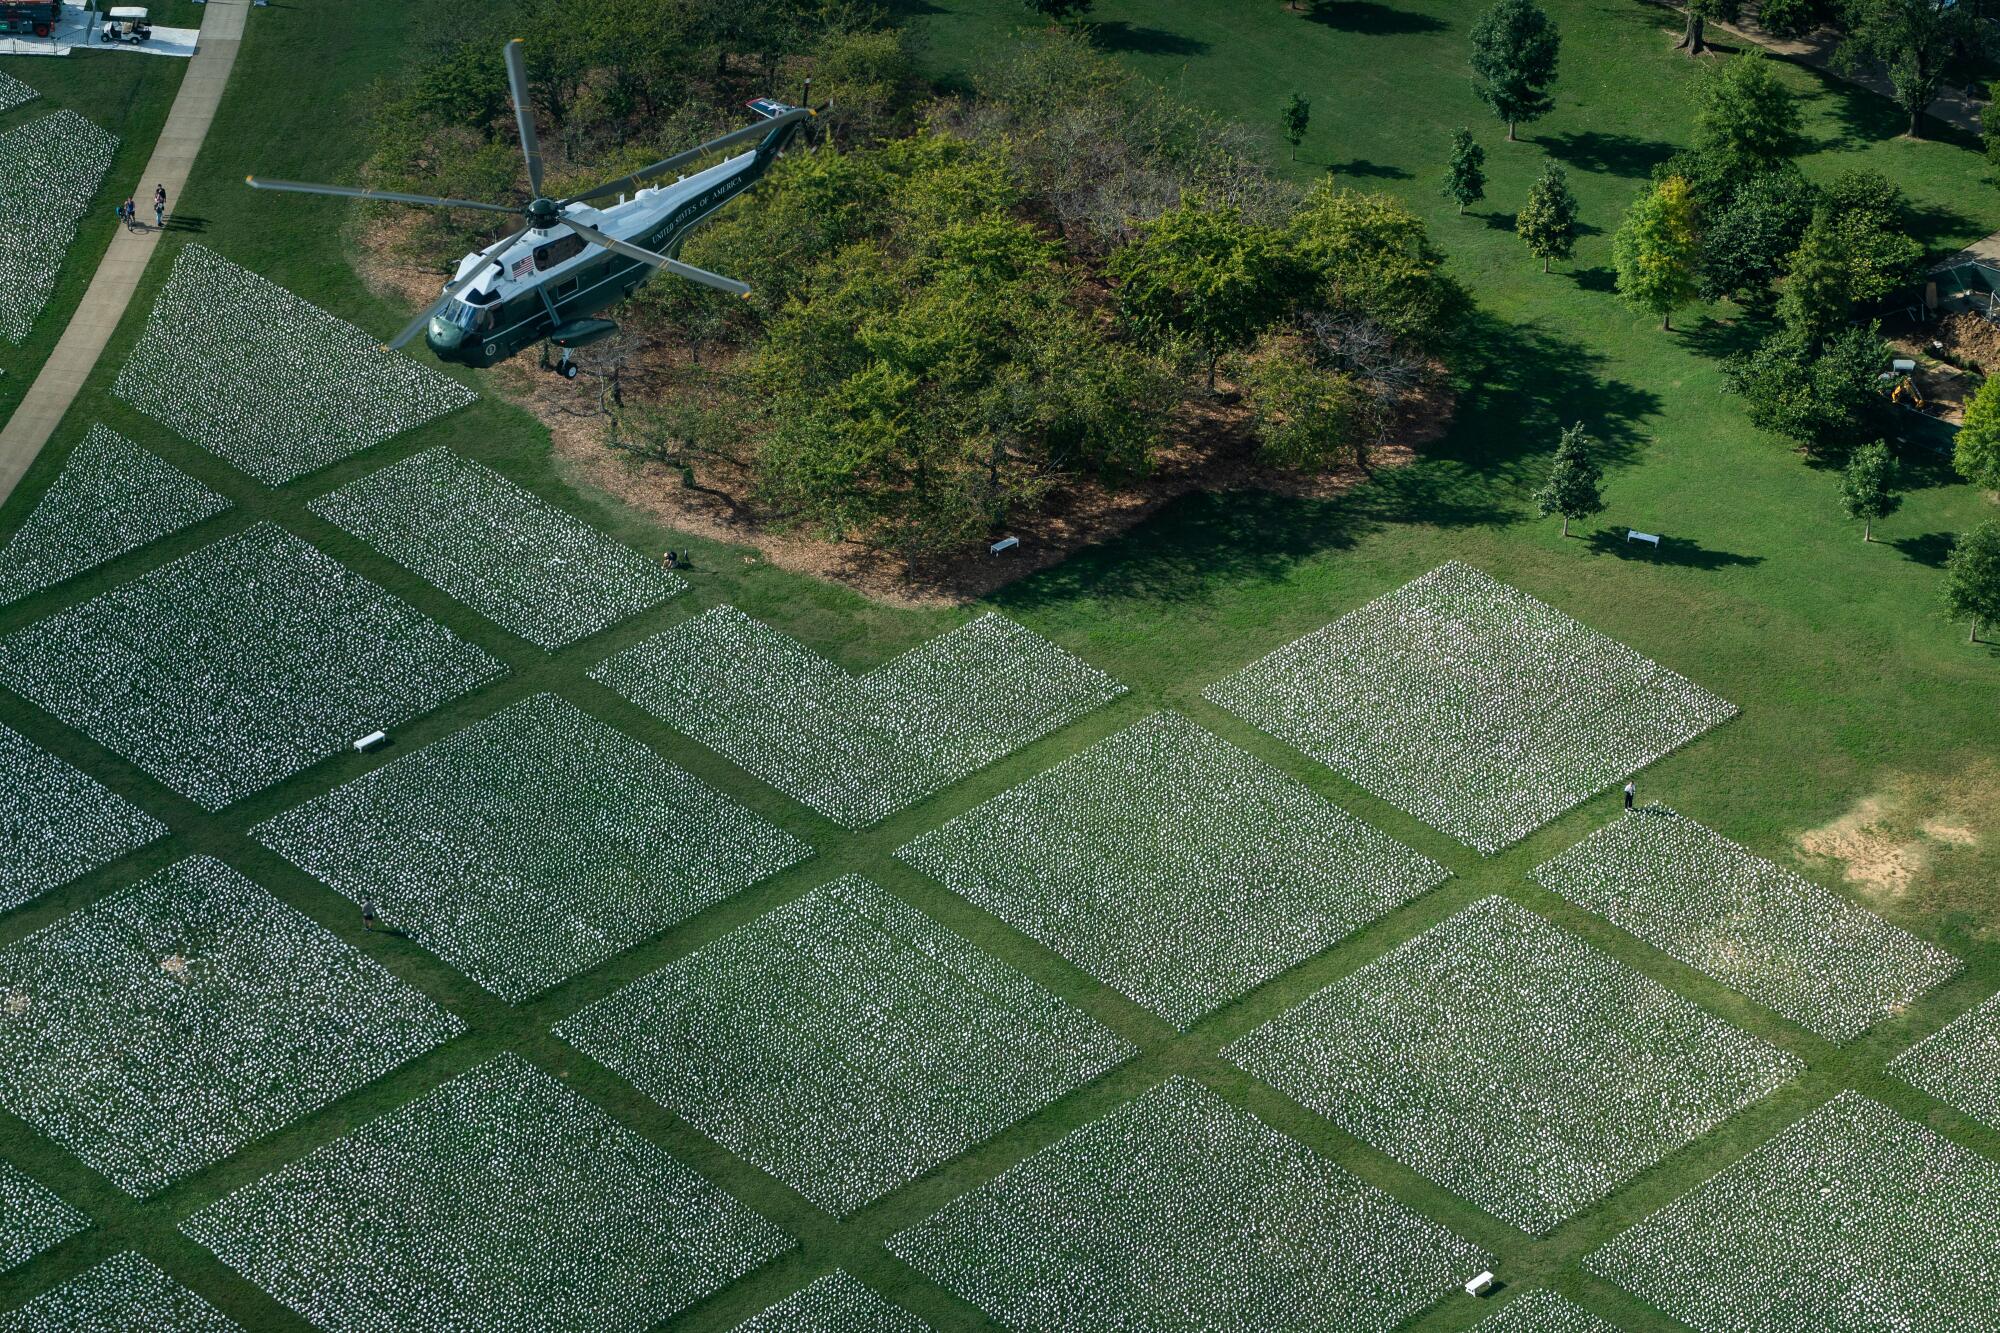 A helicopter flies over white squares on a green lawn 